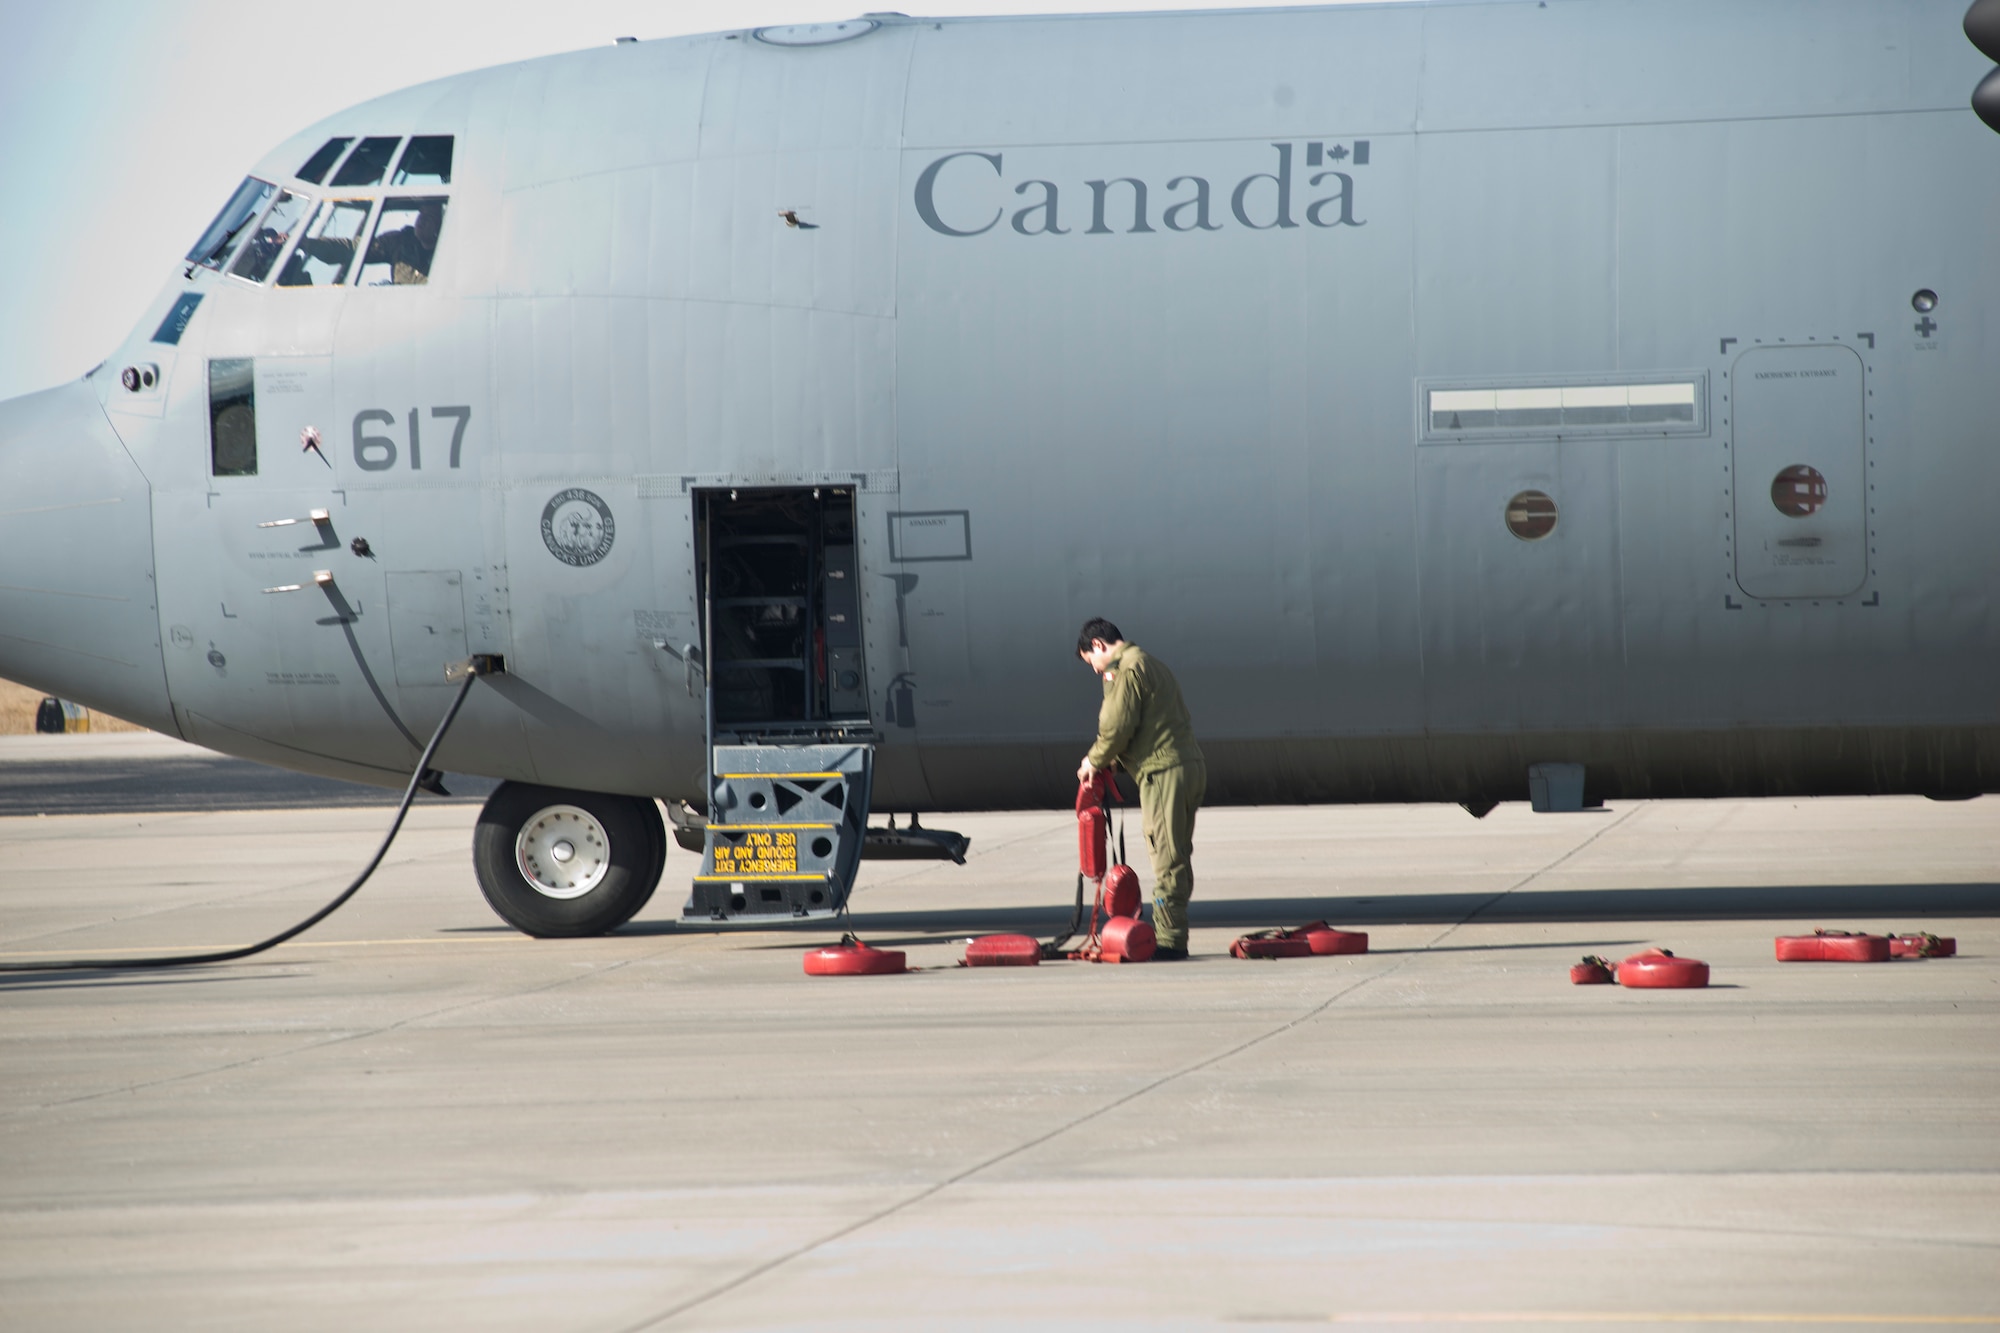 A Royal Canadian Air Force member chocks the wheels of his CC-130J aircraft at Rosecrans Memorial Airport, St. Joesph, Mo. February 1, 2018 after a training flight for the Treaty on Open Skies. Personnel from the United States, Canada, United Kingdom, France and the Czech Republic participated in the flight designed to promote international cooperation and transparency. (U.S. Air National Guard photo/Tech. Sgt. John Hillier)